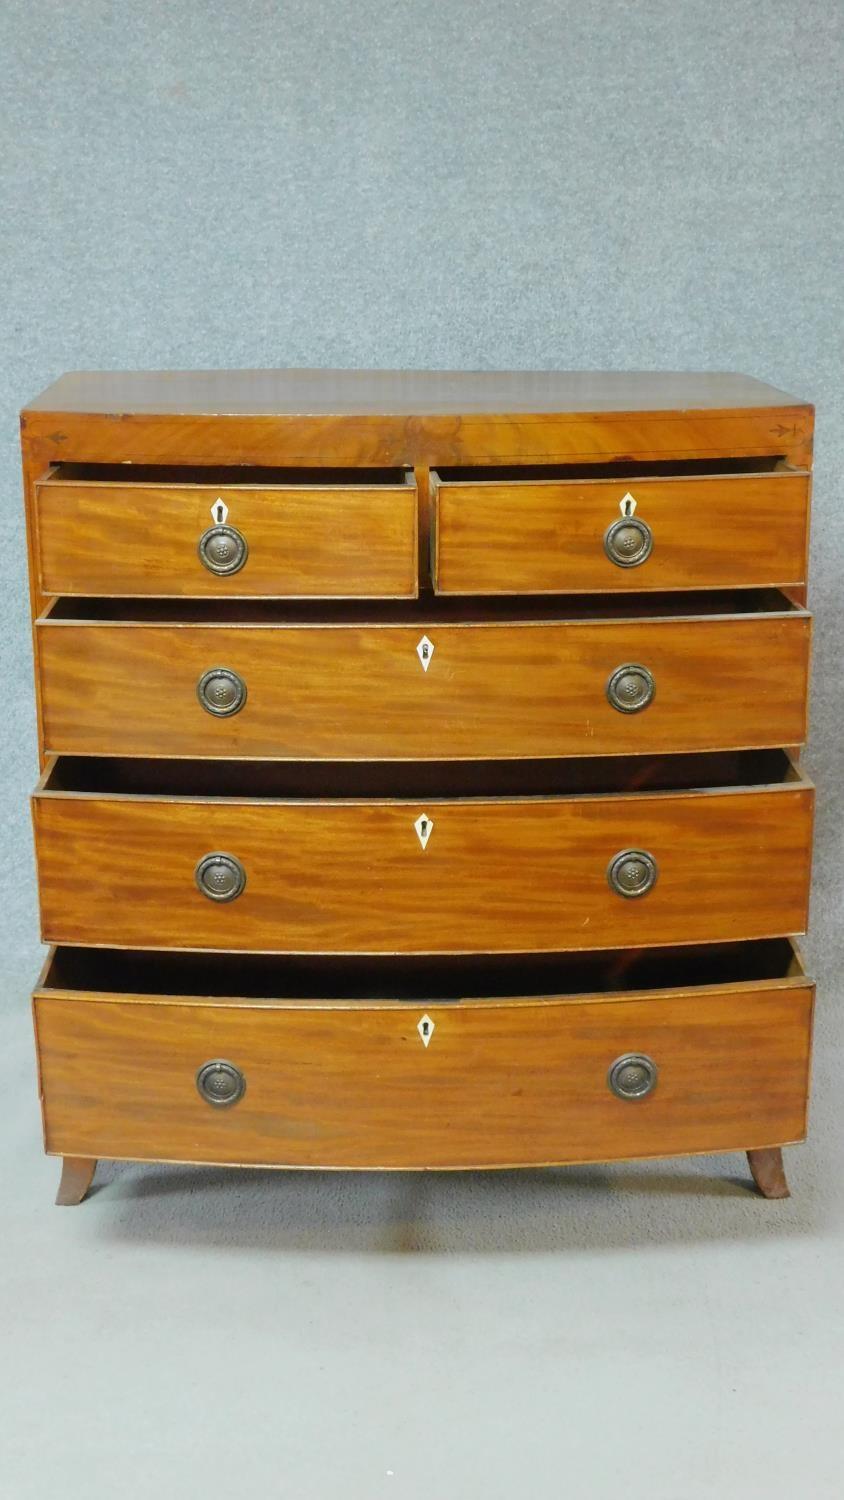 A Regency mahogany bowfronted chest of drawers with ebony inlay to the frieze and with ivory - Image 3 of 5